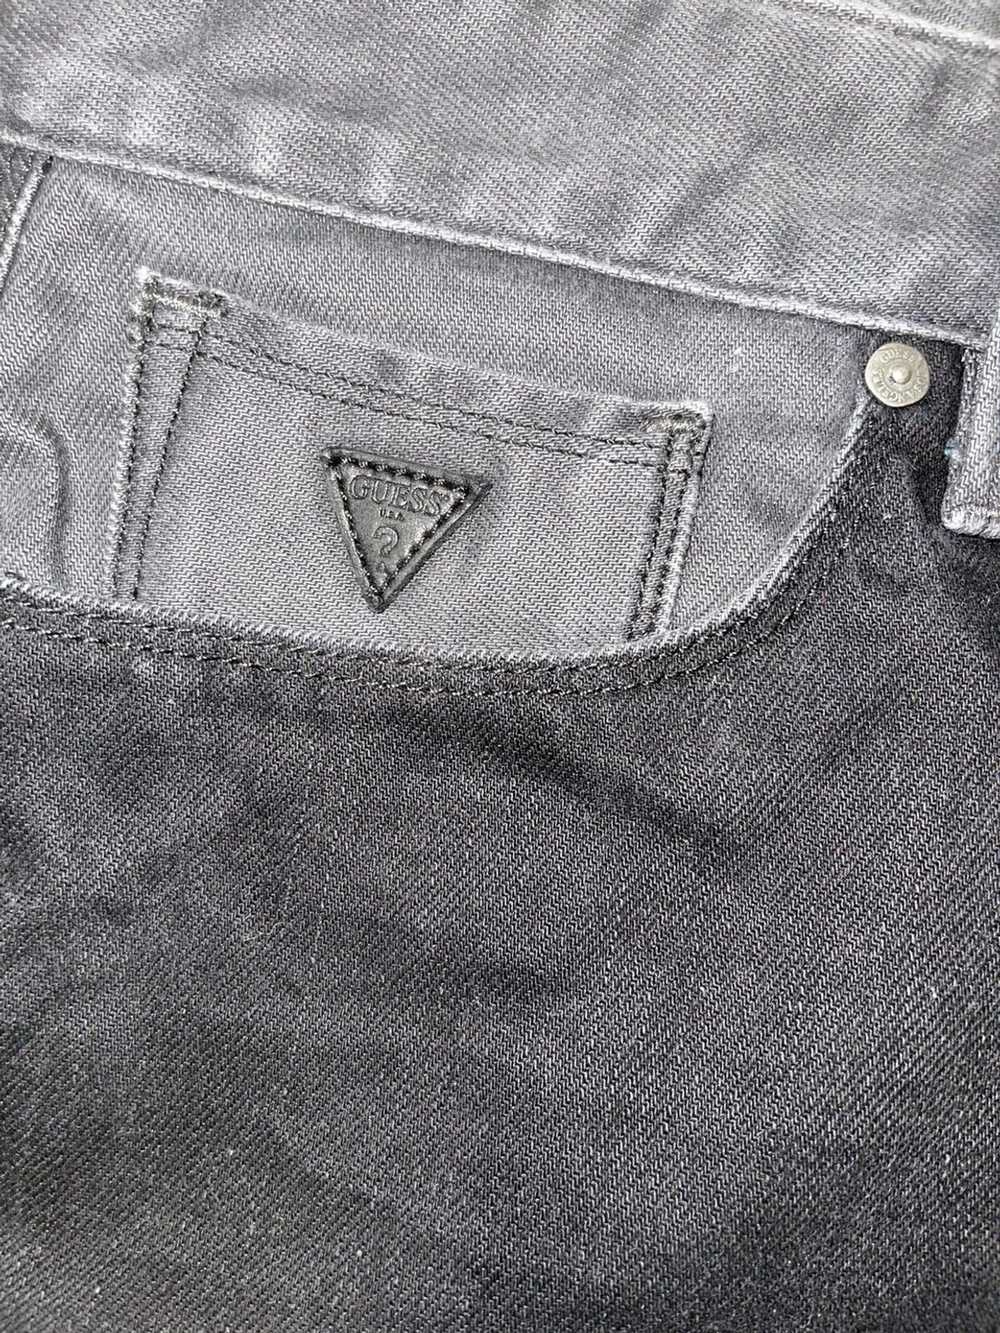 Guess Guess Slim Tapered Jeans - image 3